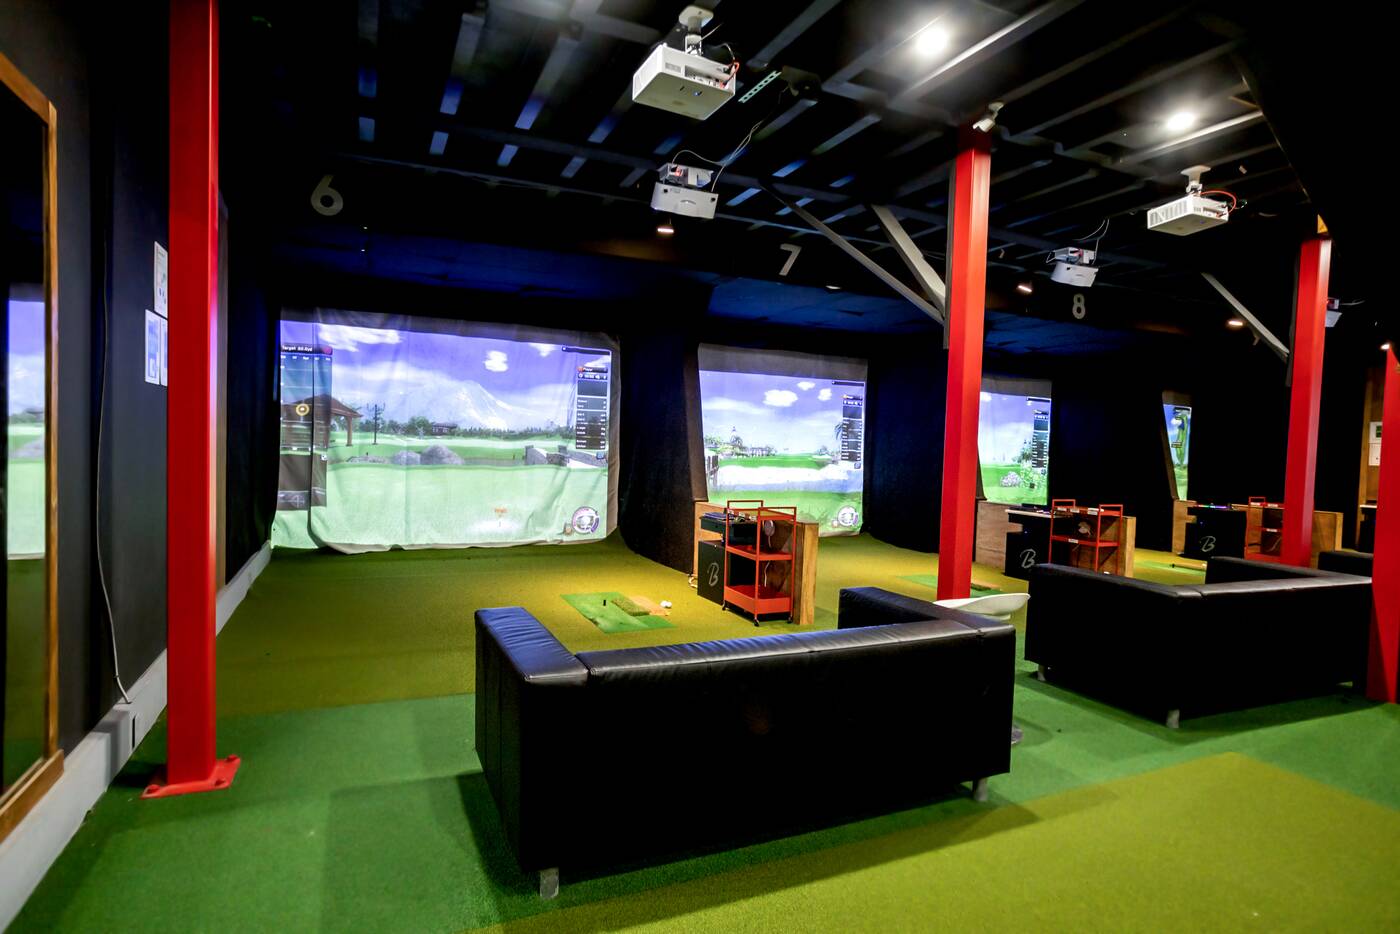 Golf enthusiasts and newbies can practice year-round at Ontario's Target  Indoor Golf